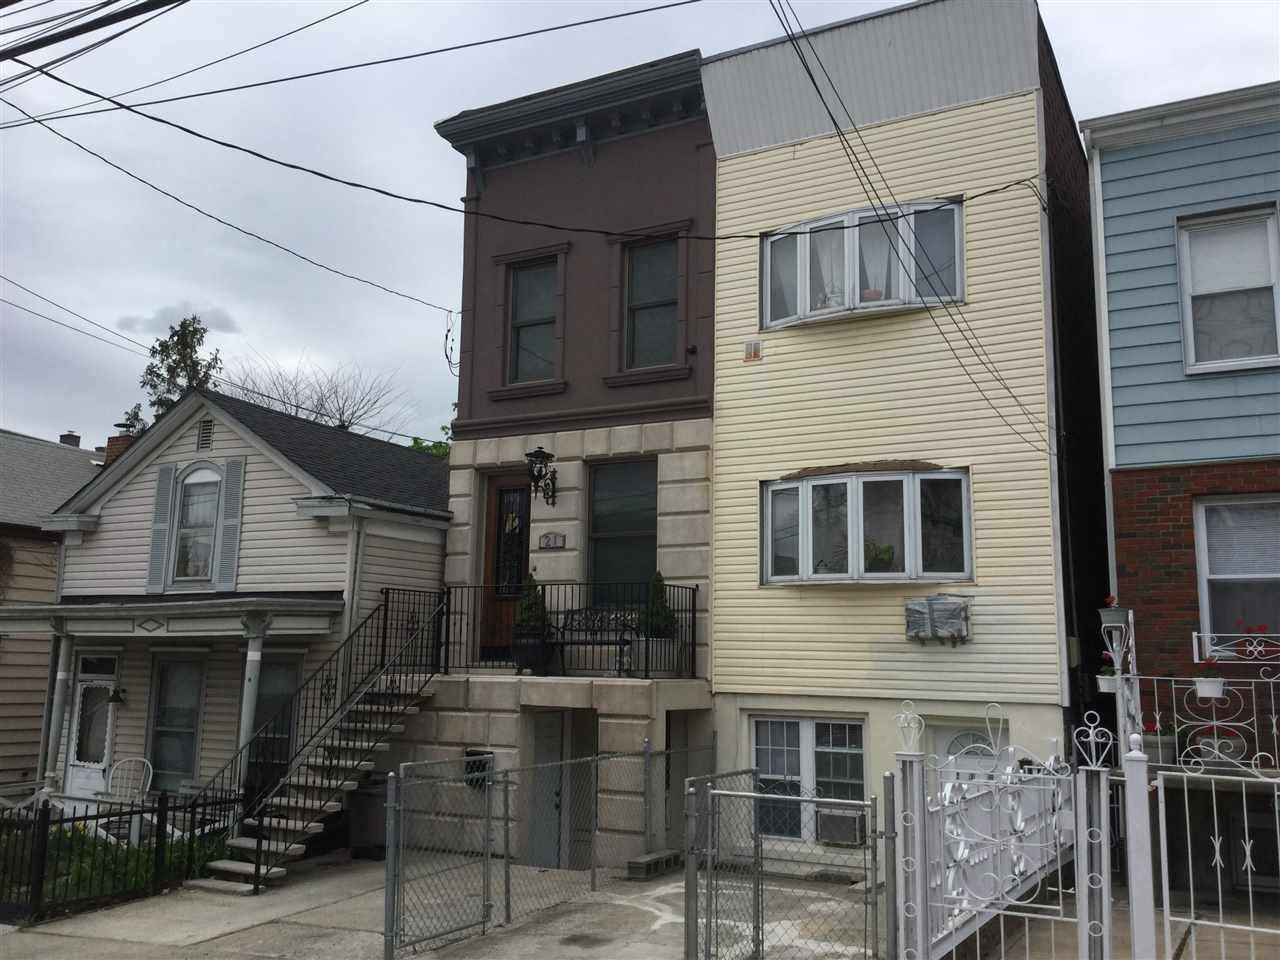 Single family home in Jersey City Heights with parking